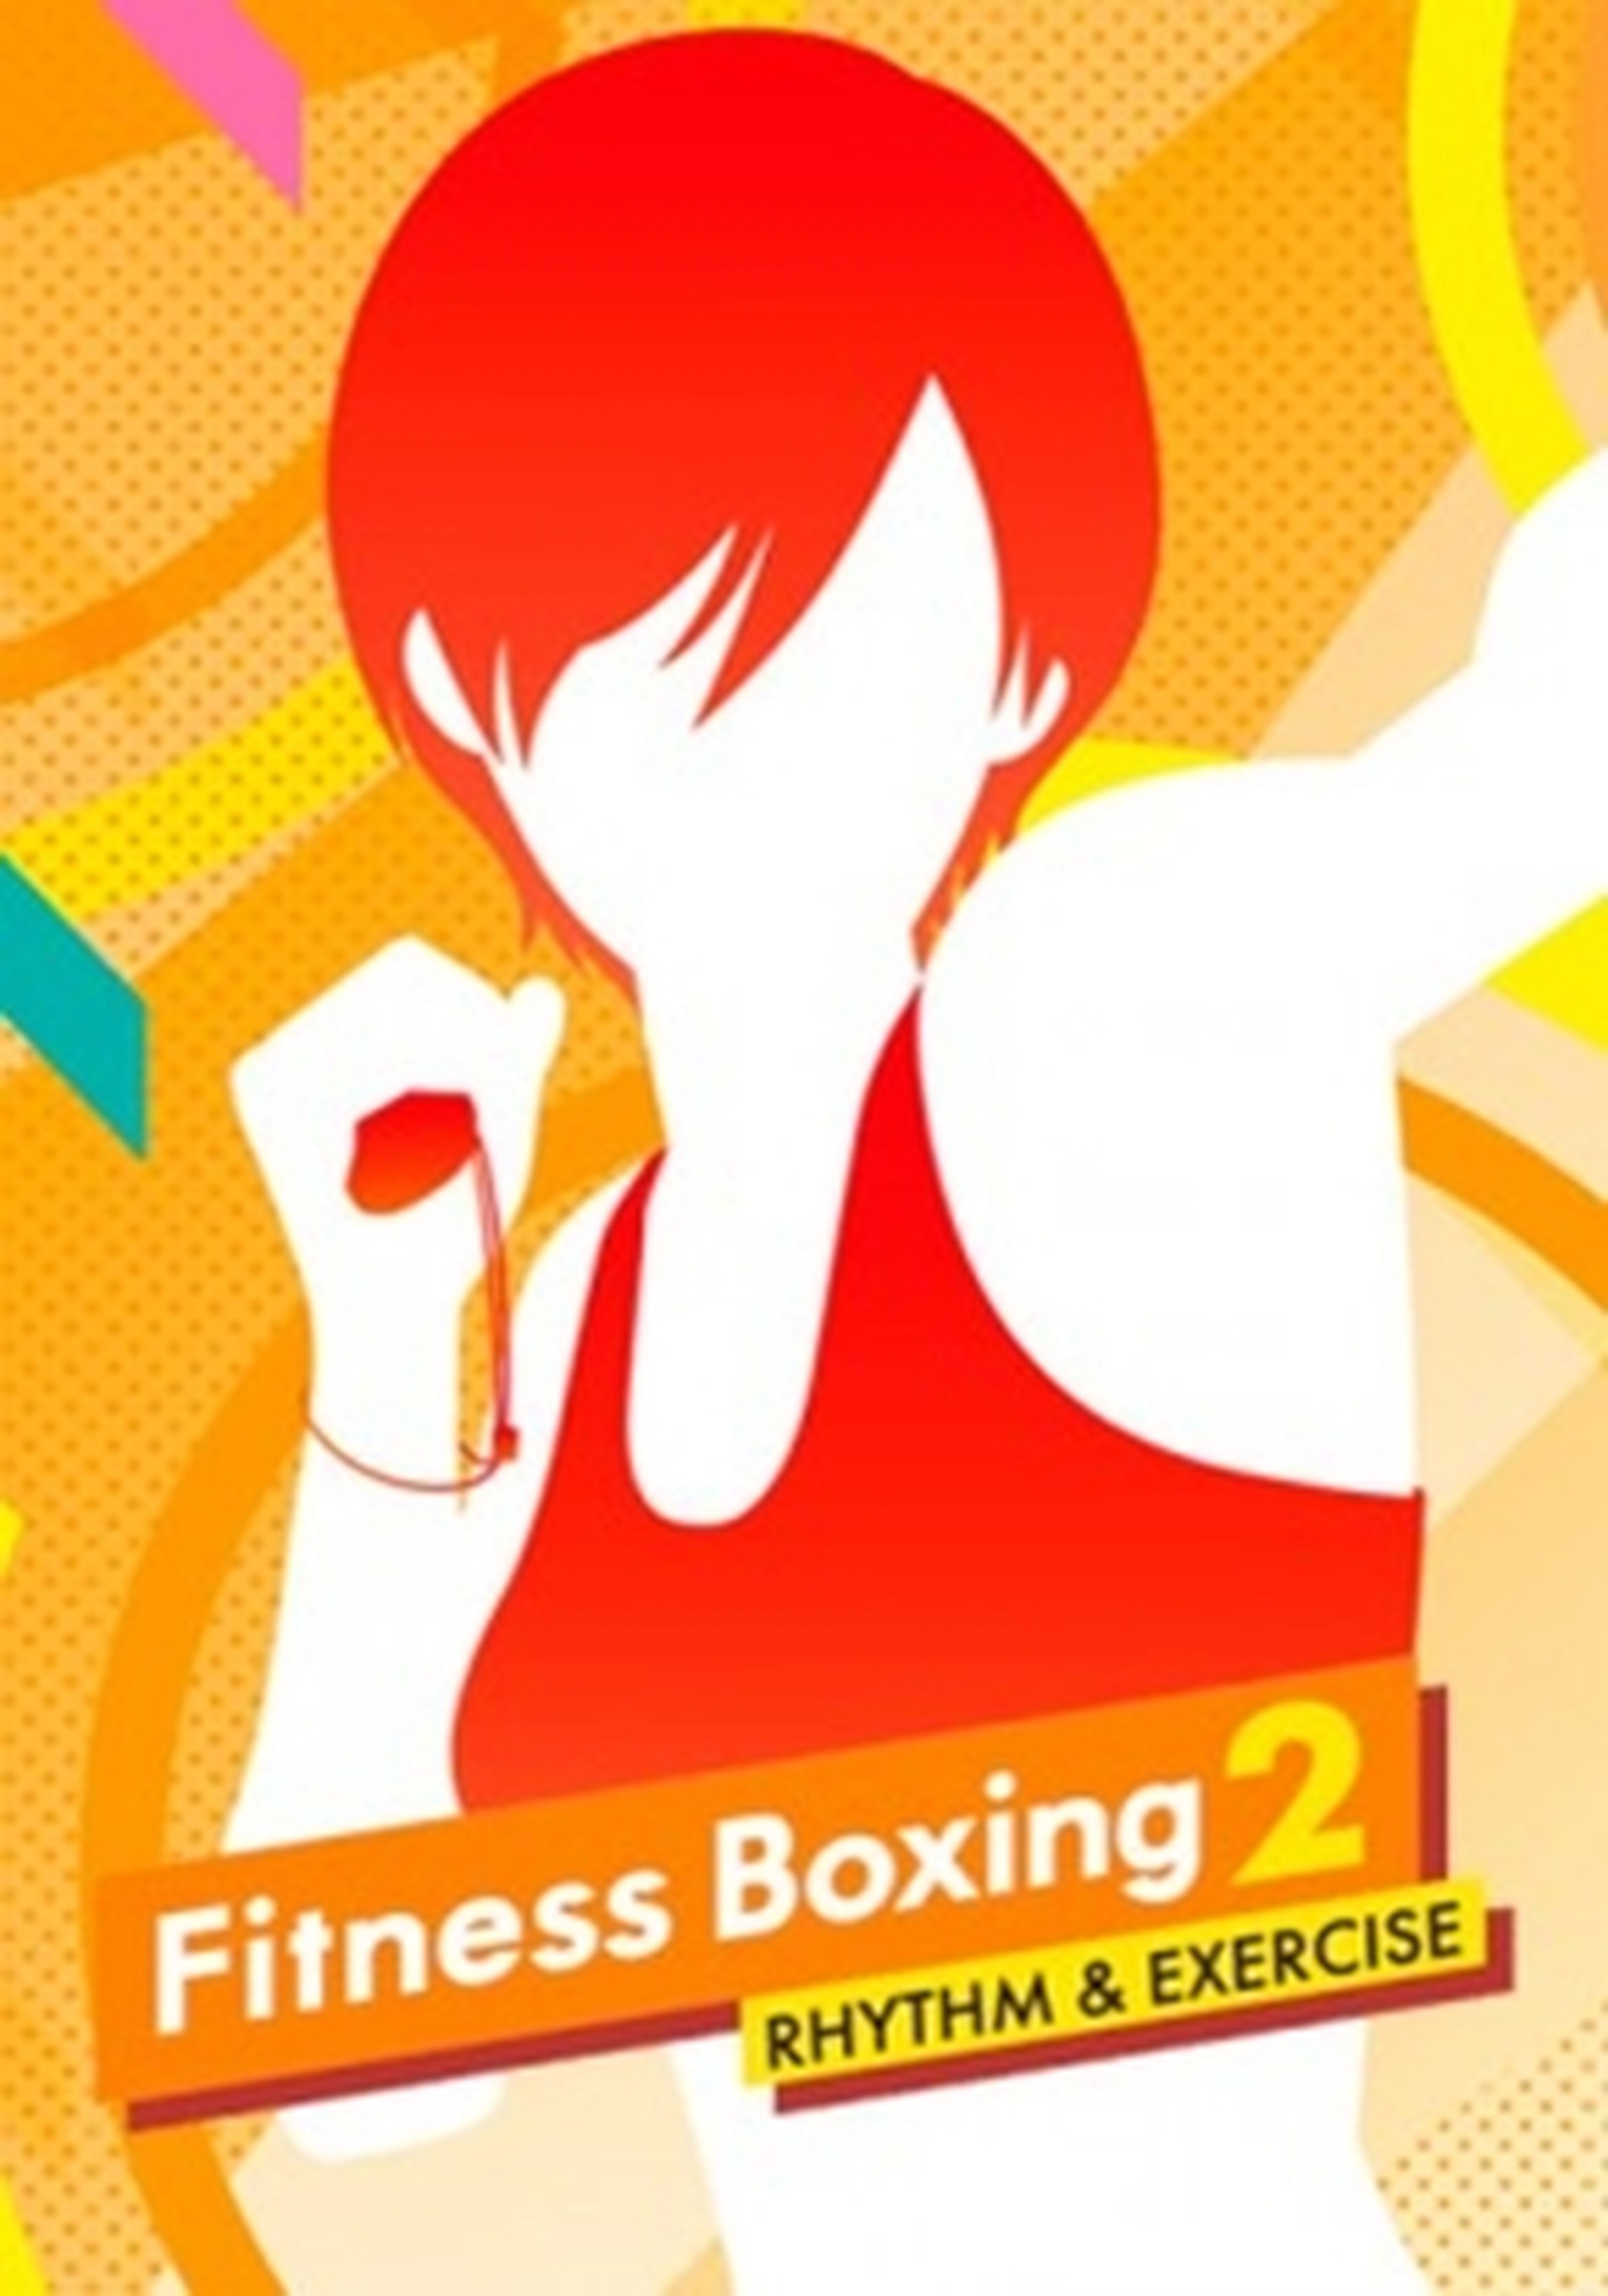 Fitness Boxing 2 Rhythm and Exercise cartel